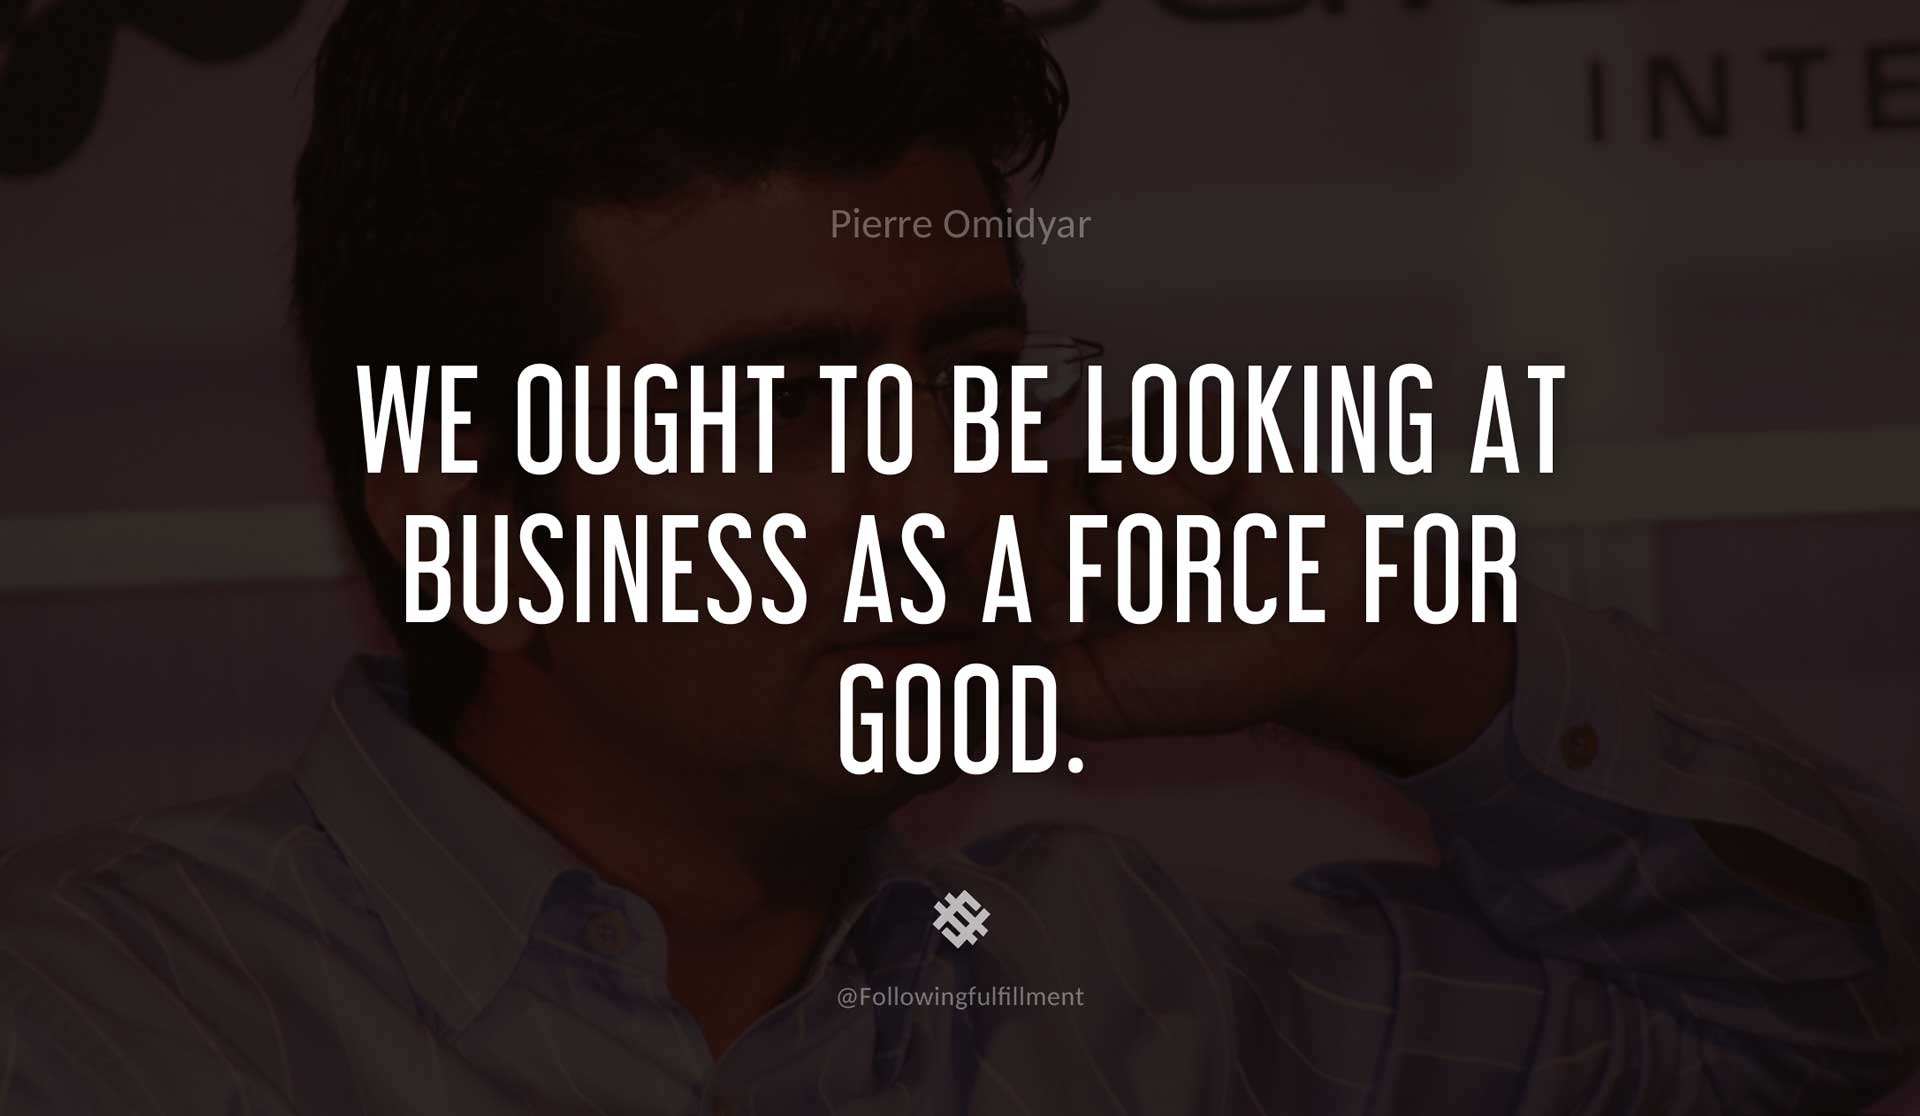 We-ought-to-be-looking-at-business-as-a-force-for-good.-PIERRE-OMIDYAR-Quote.jpg